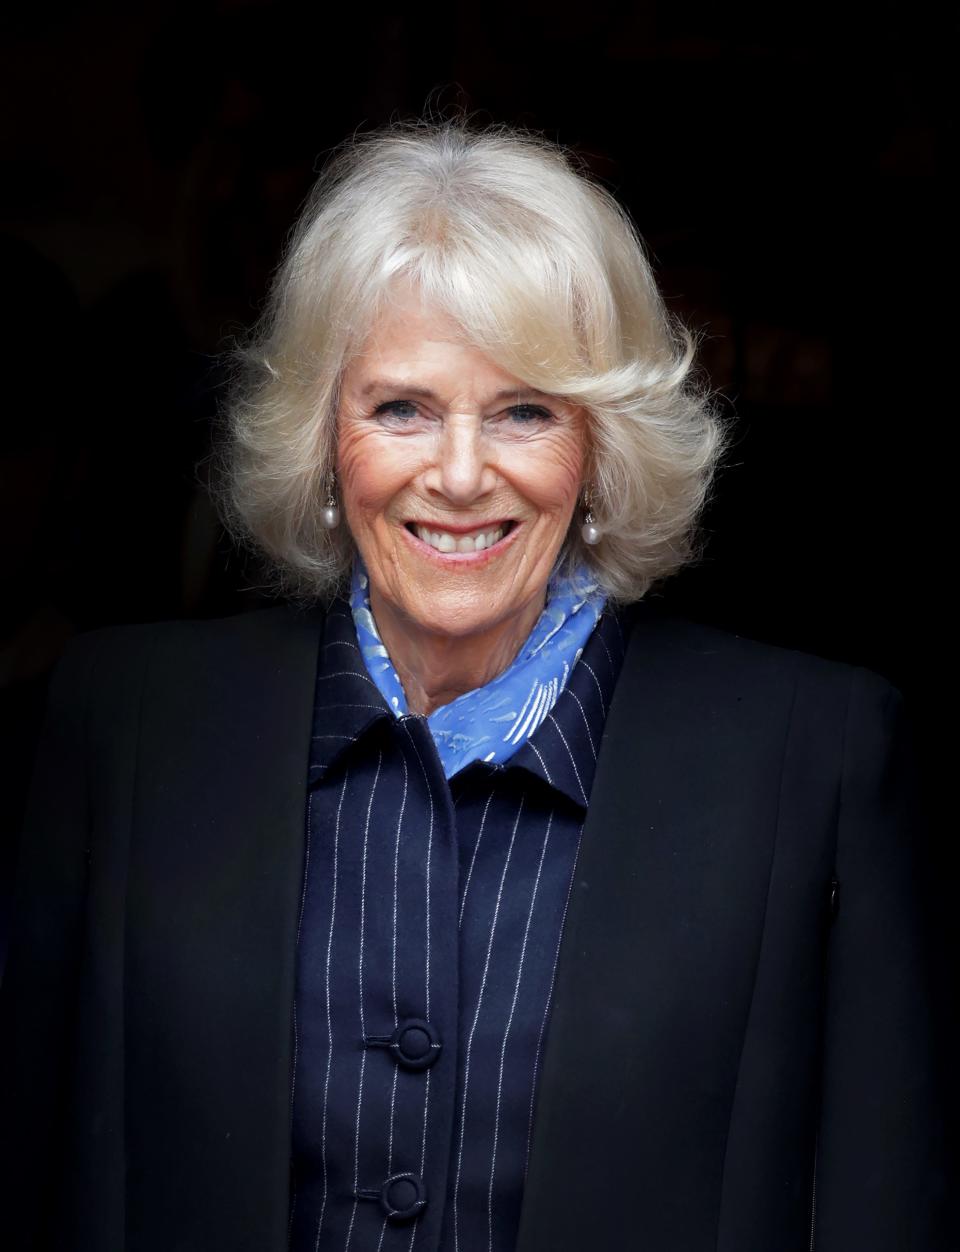 Queen Consort Camilla has no constitutional power, but she's an integral part of the British monarchy's image.